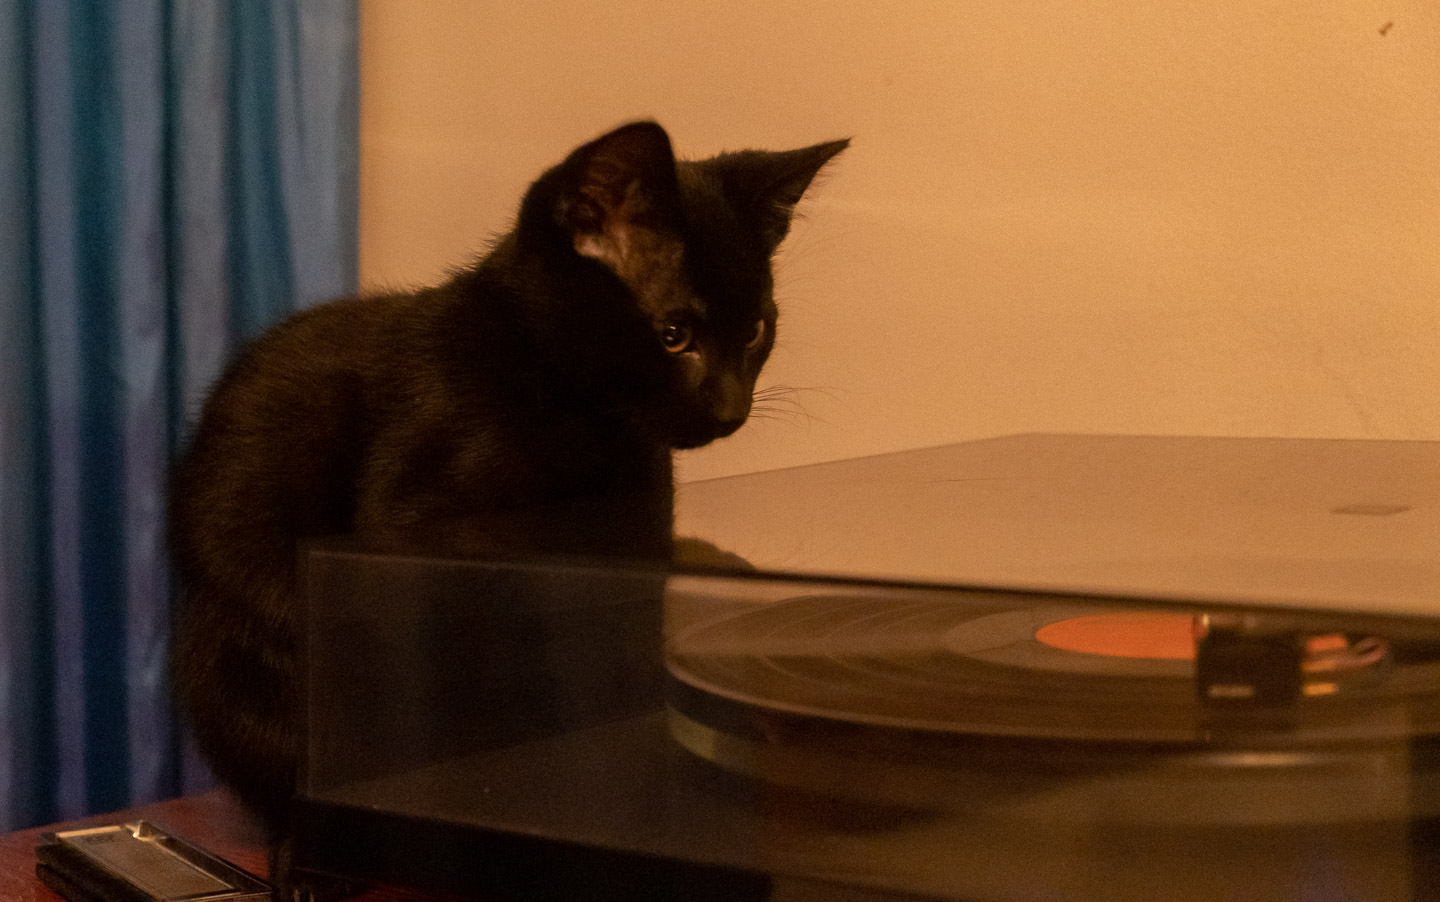 þ the kitten and a record player